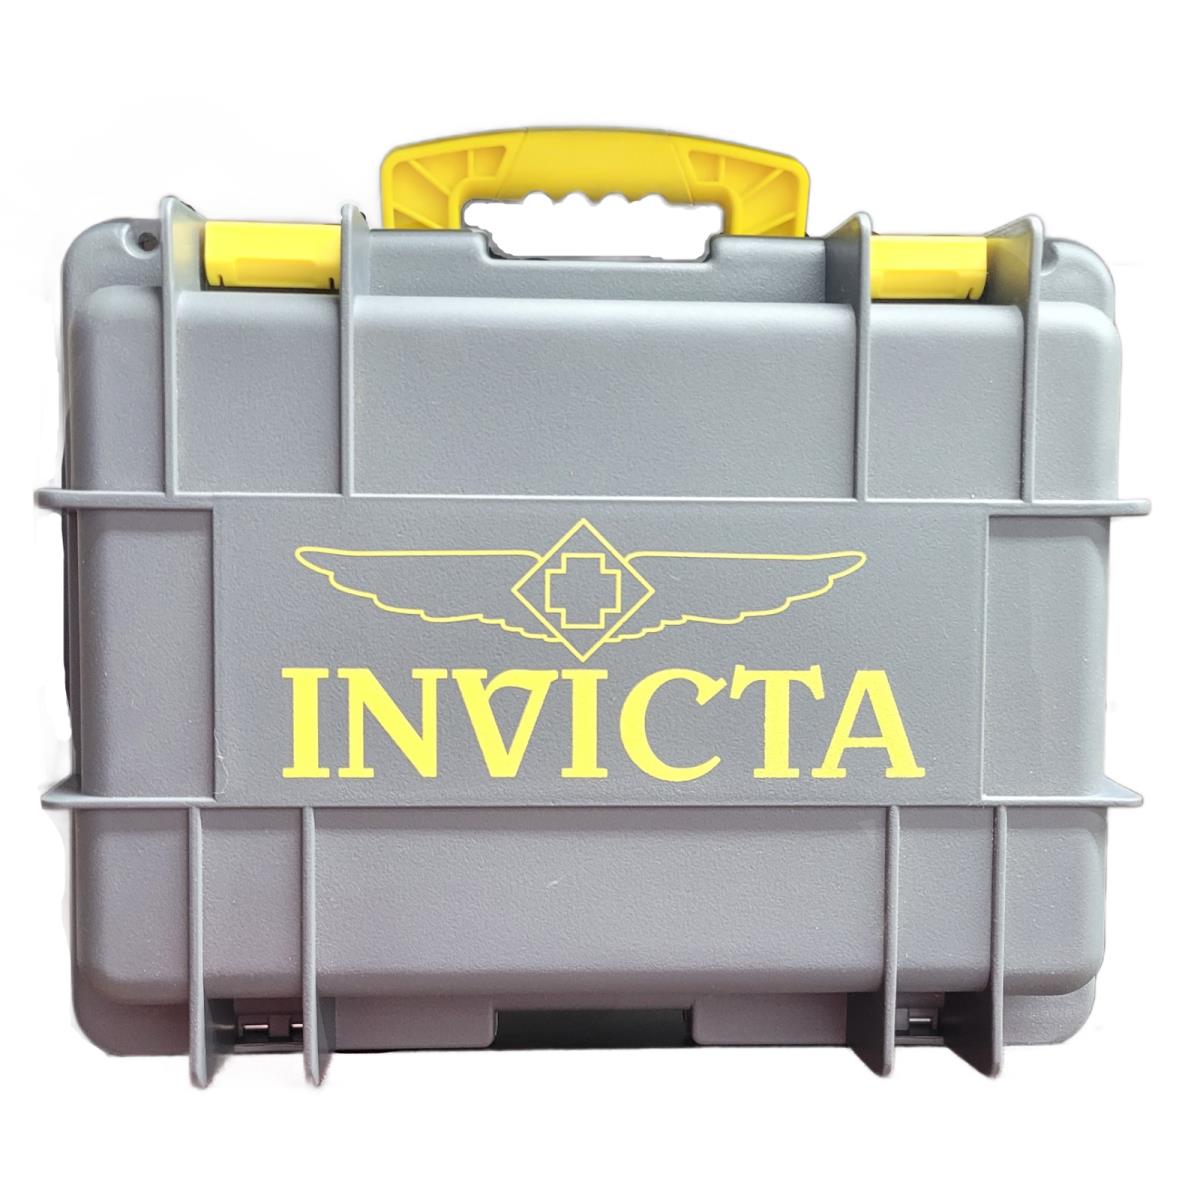 Invicta Grey/yellow 6 Slot Dive Watch Case Protector Box with Watch Cleaning Kit